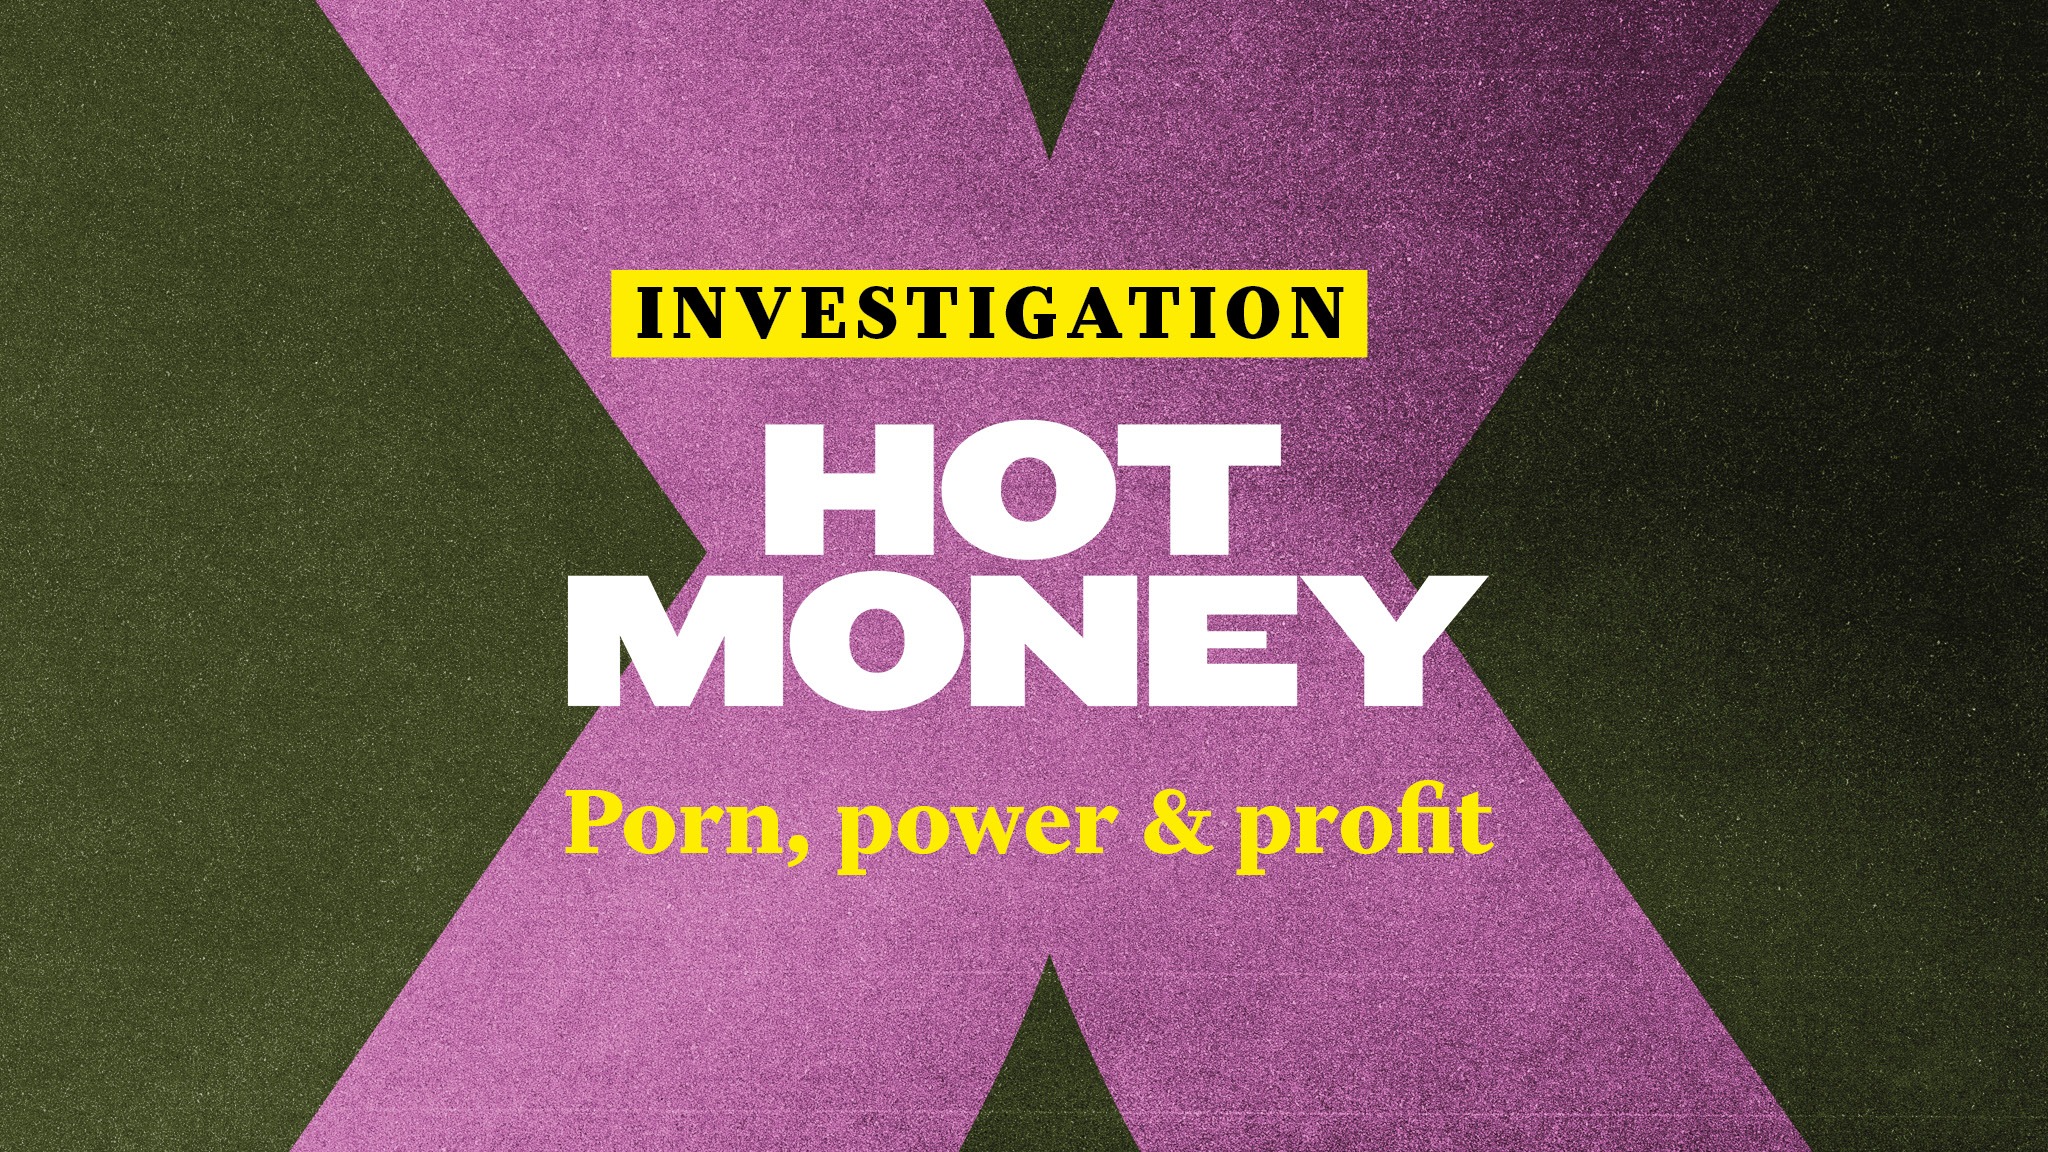 Palyboy4 Com - Hot Money: porn, power and profit | Financial Times